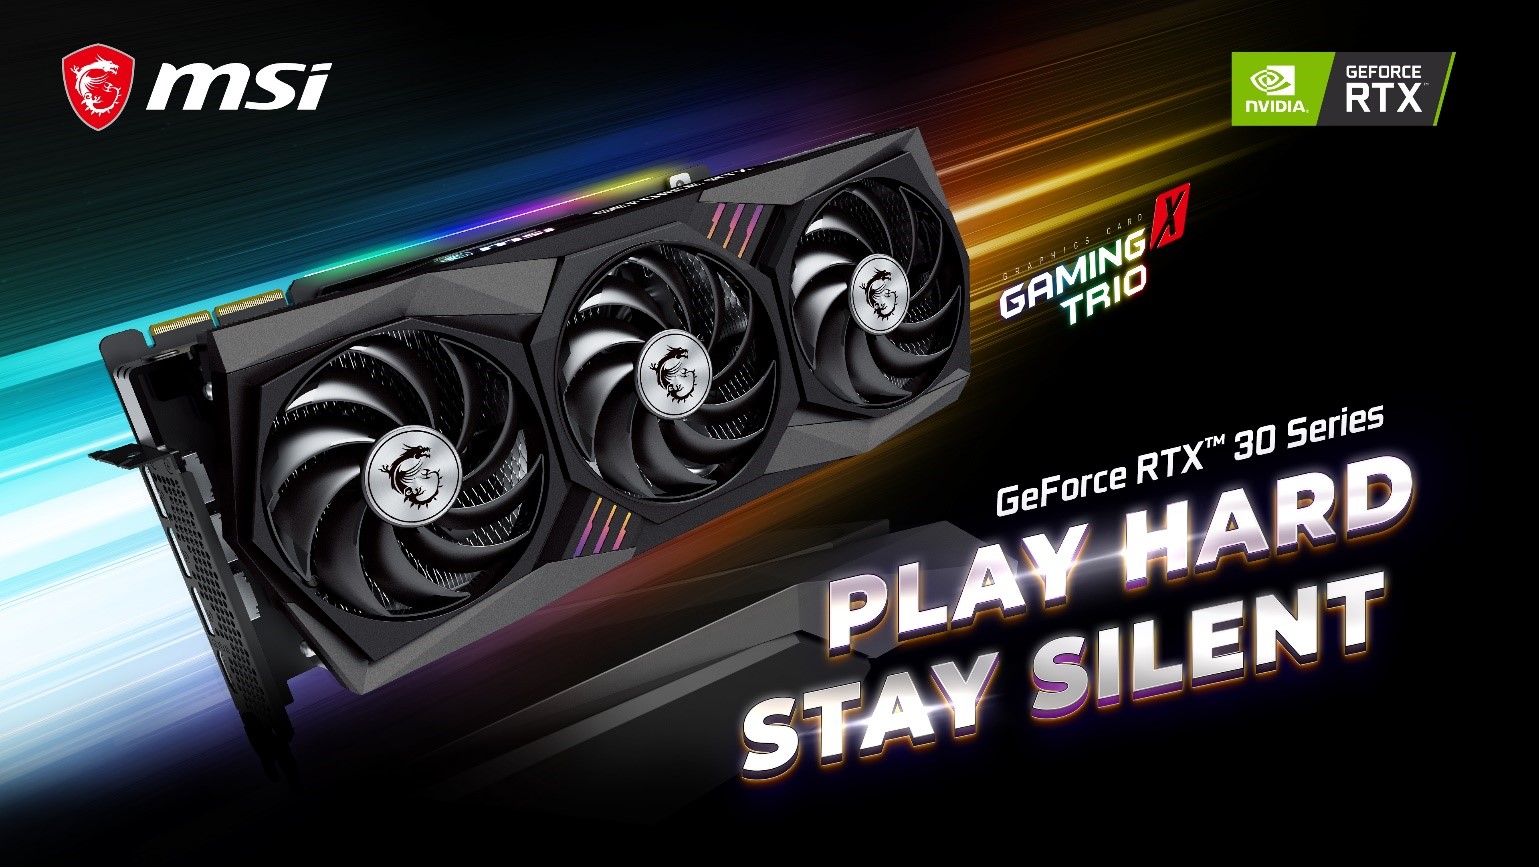 MSI announces GeForce RTX 3090, RTX 3080 and RTX 3070 graphics cards